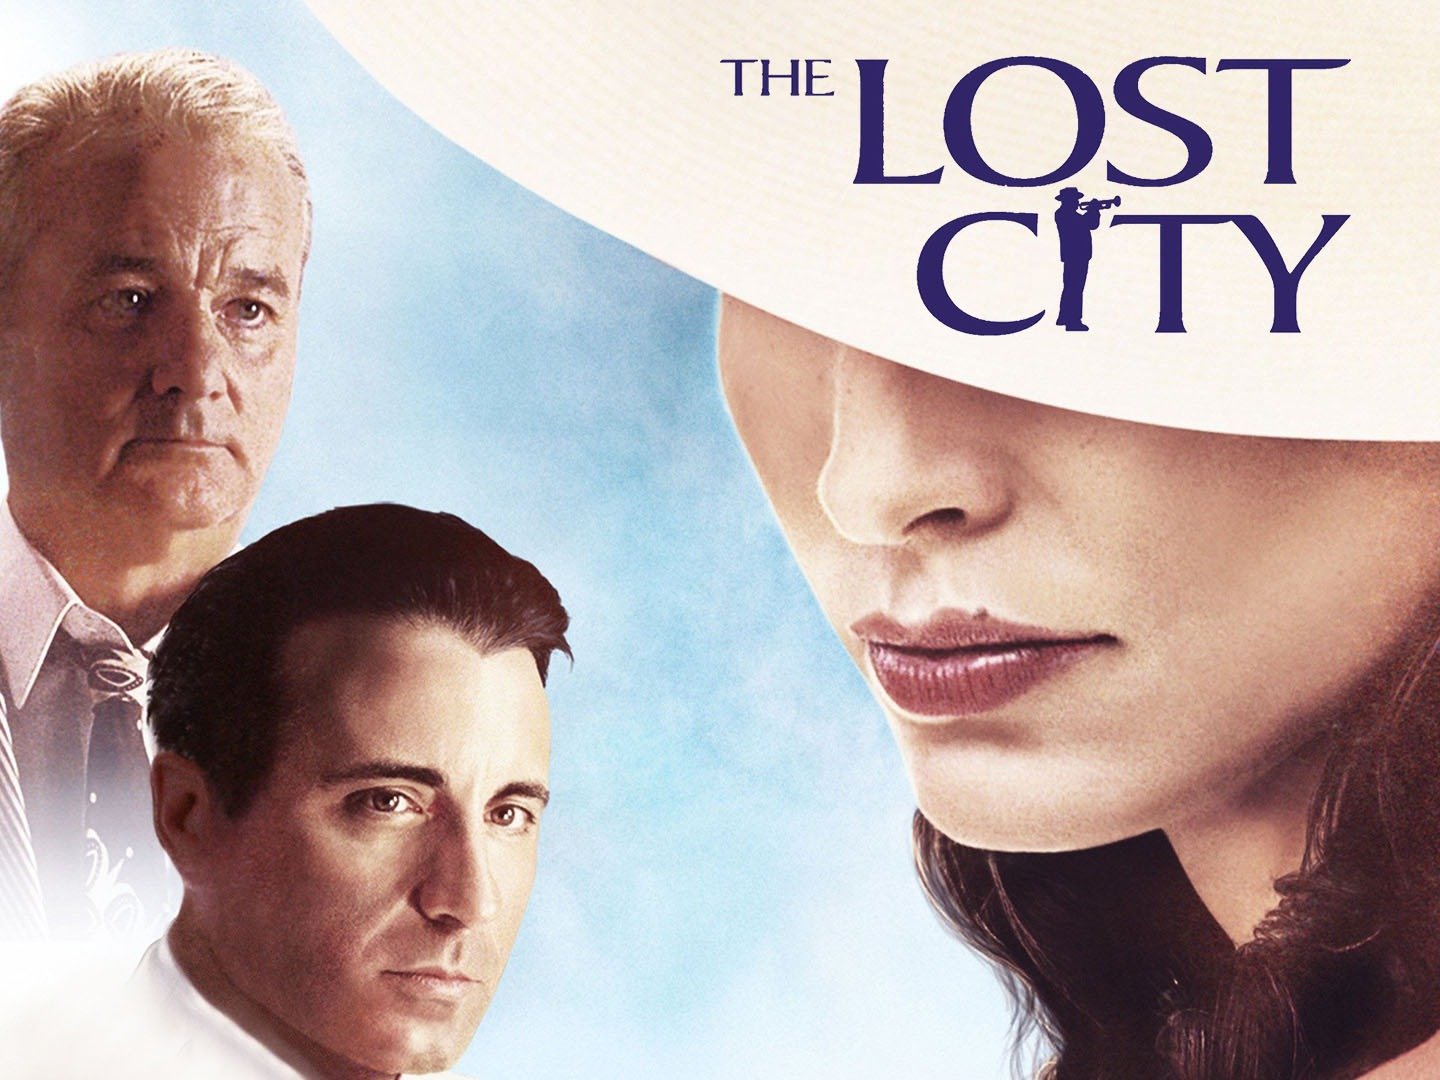 the lost city movie review rotten tomatoes